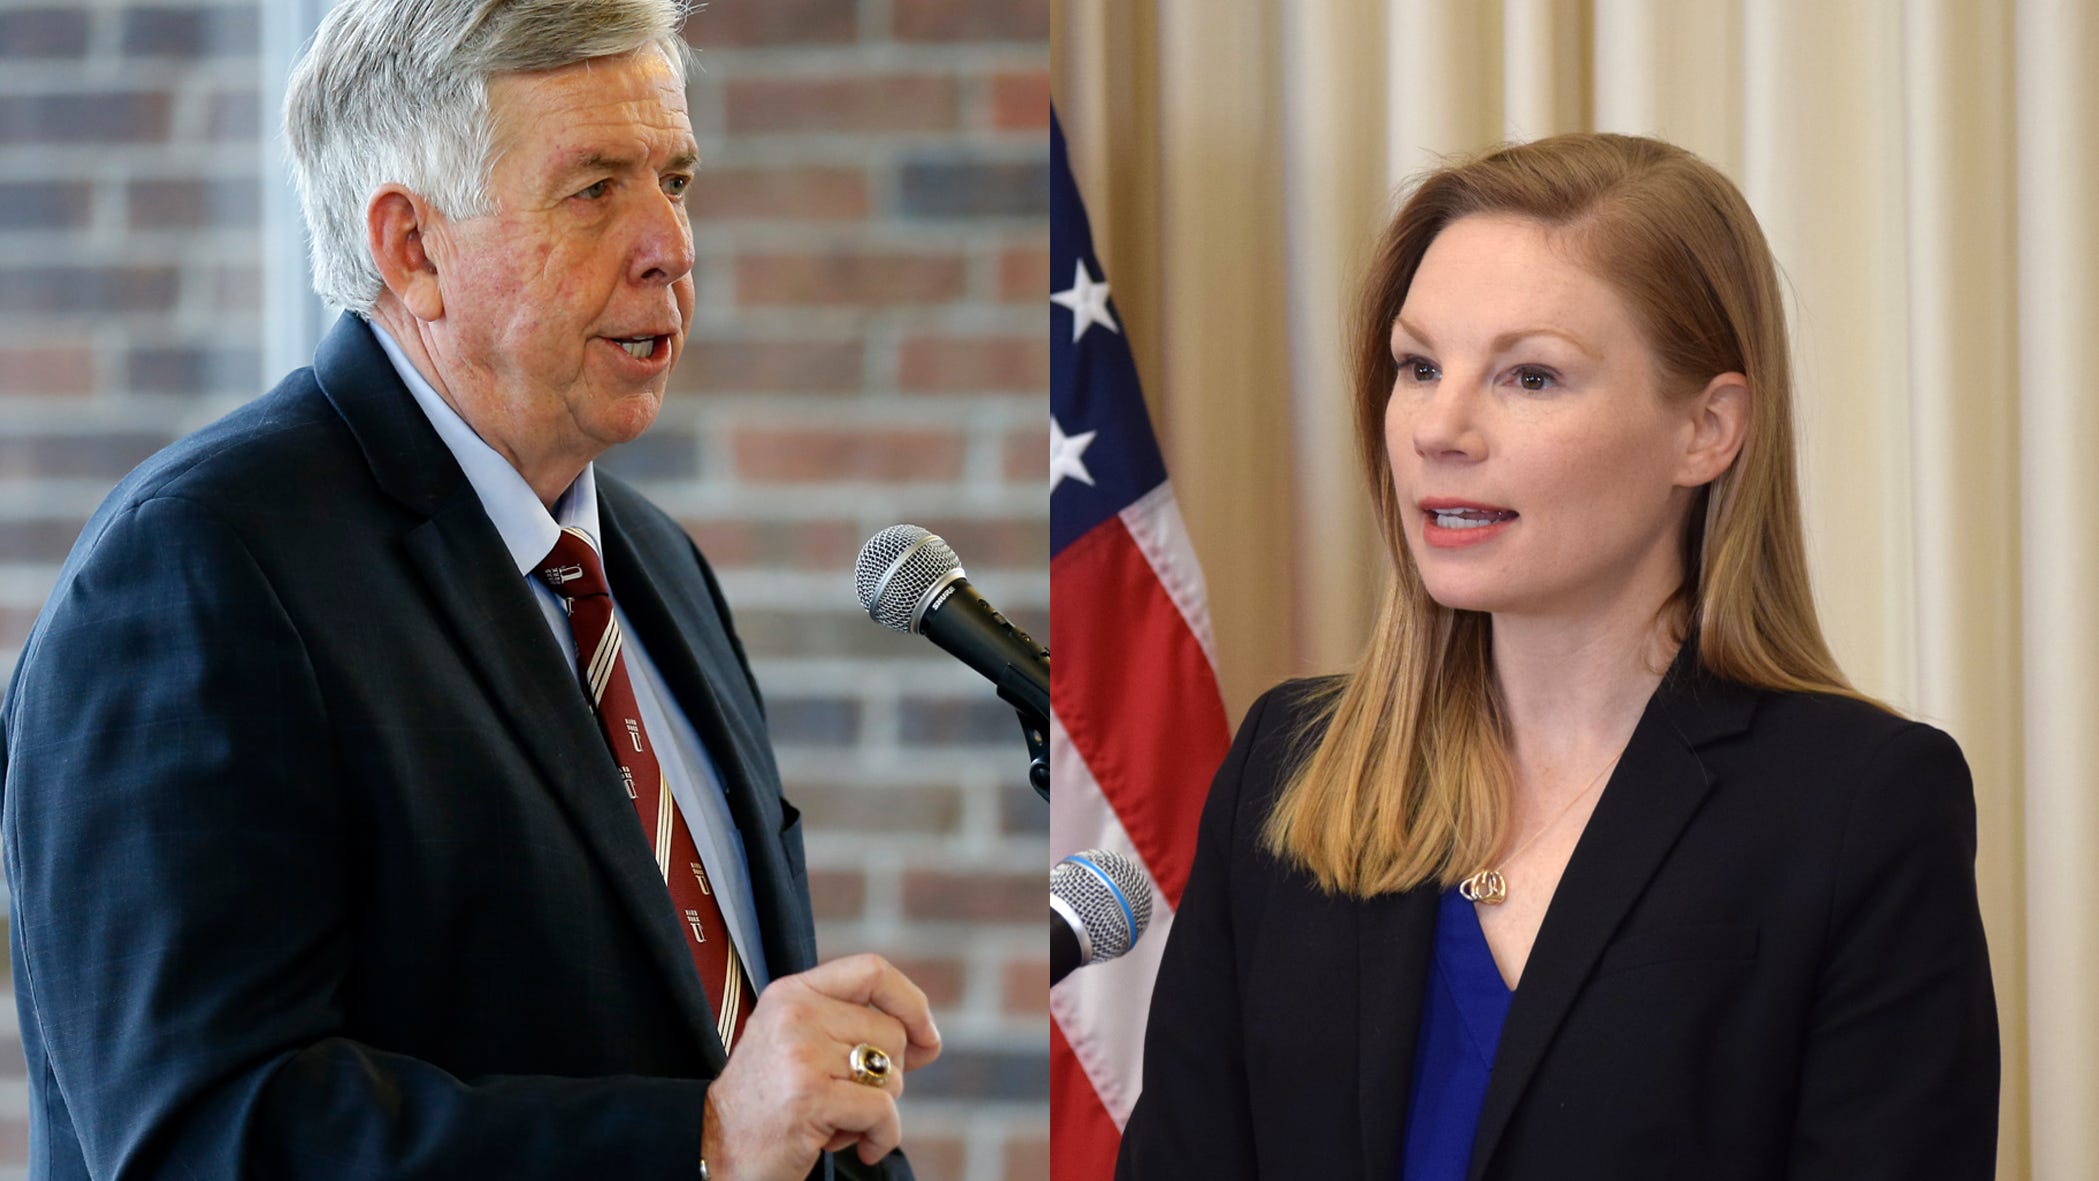 Missouri governor race Parson leads Galloway, poll says